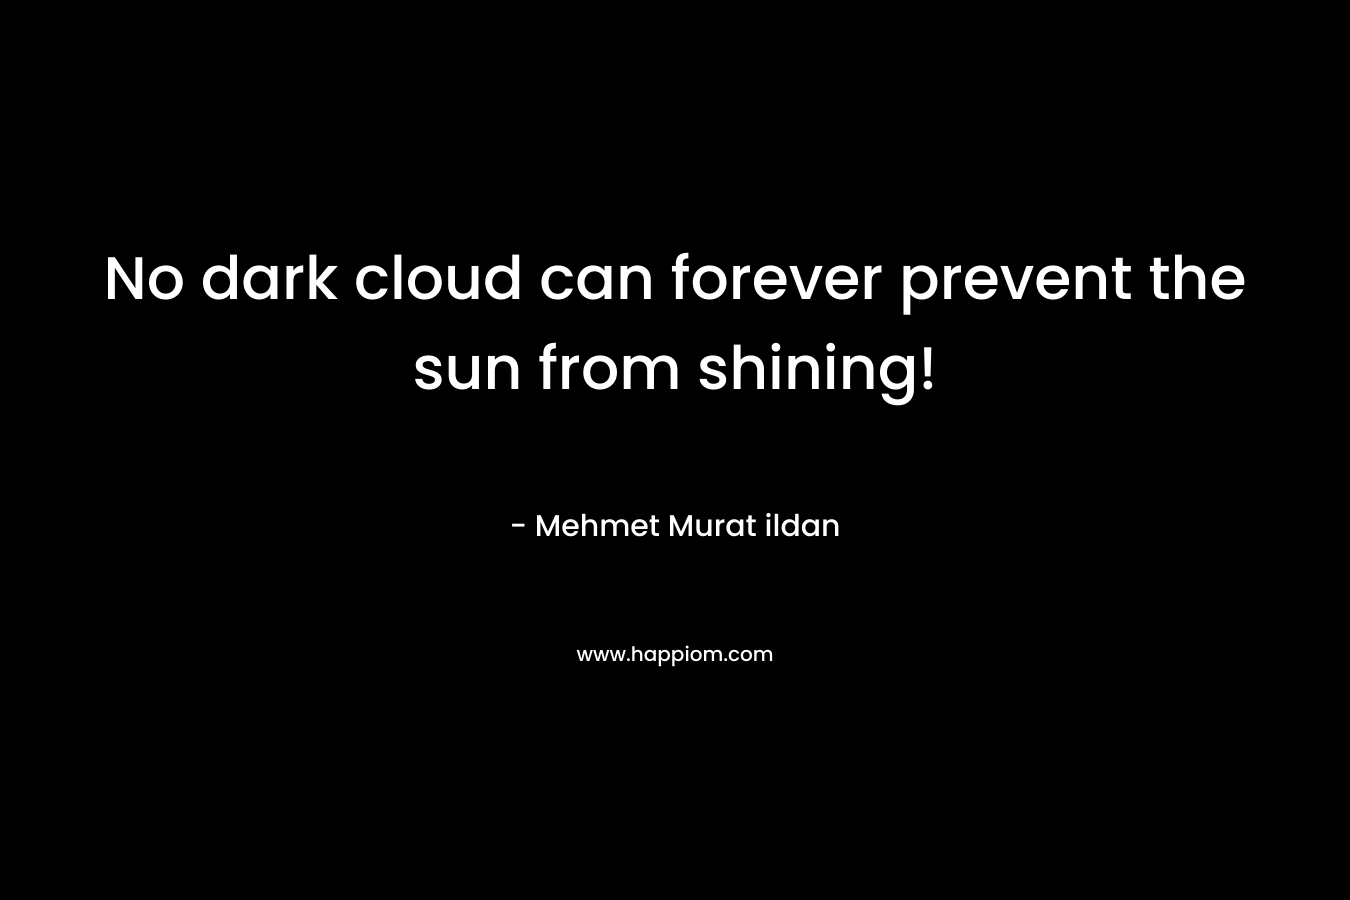 No dark cloud can forever prevent the sun from shining!